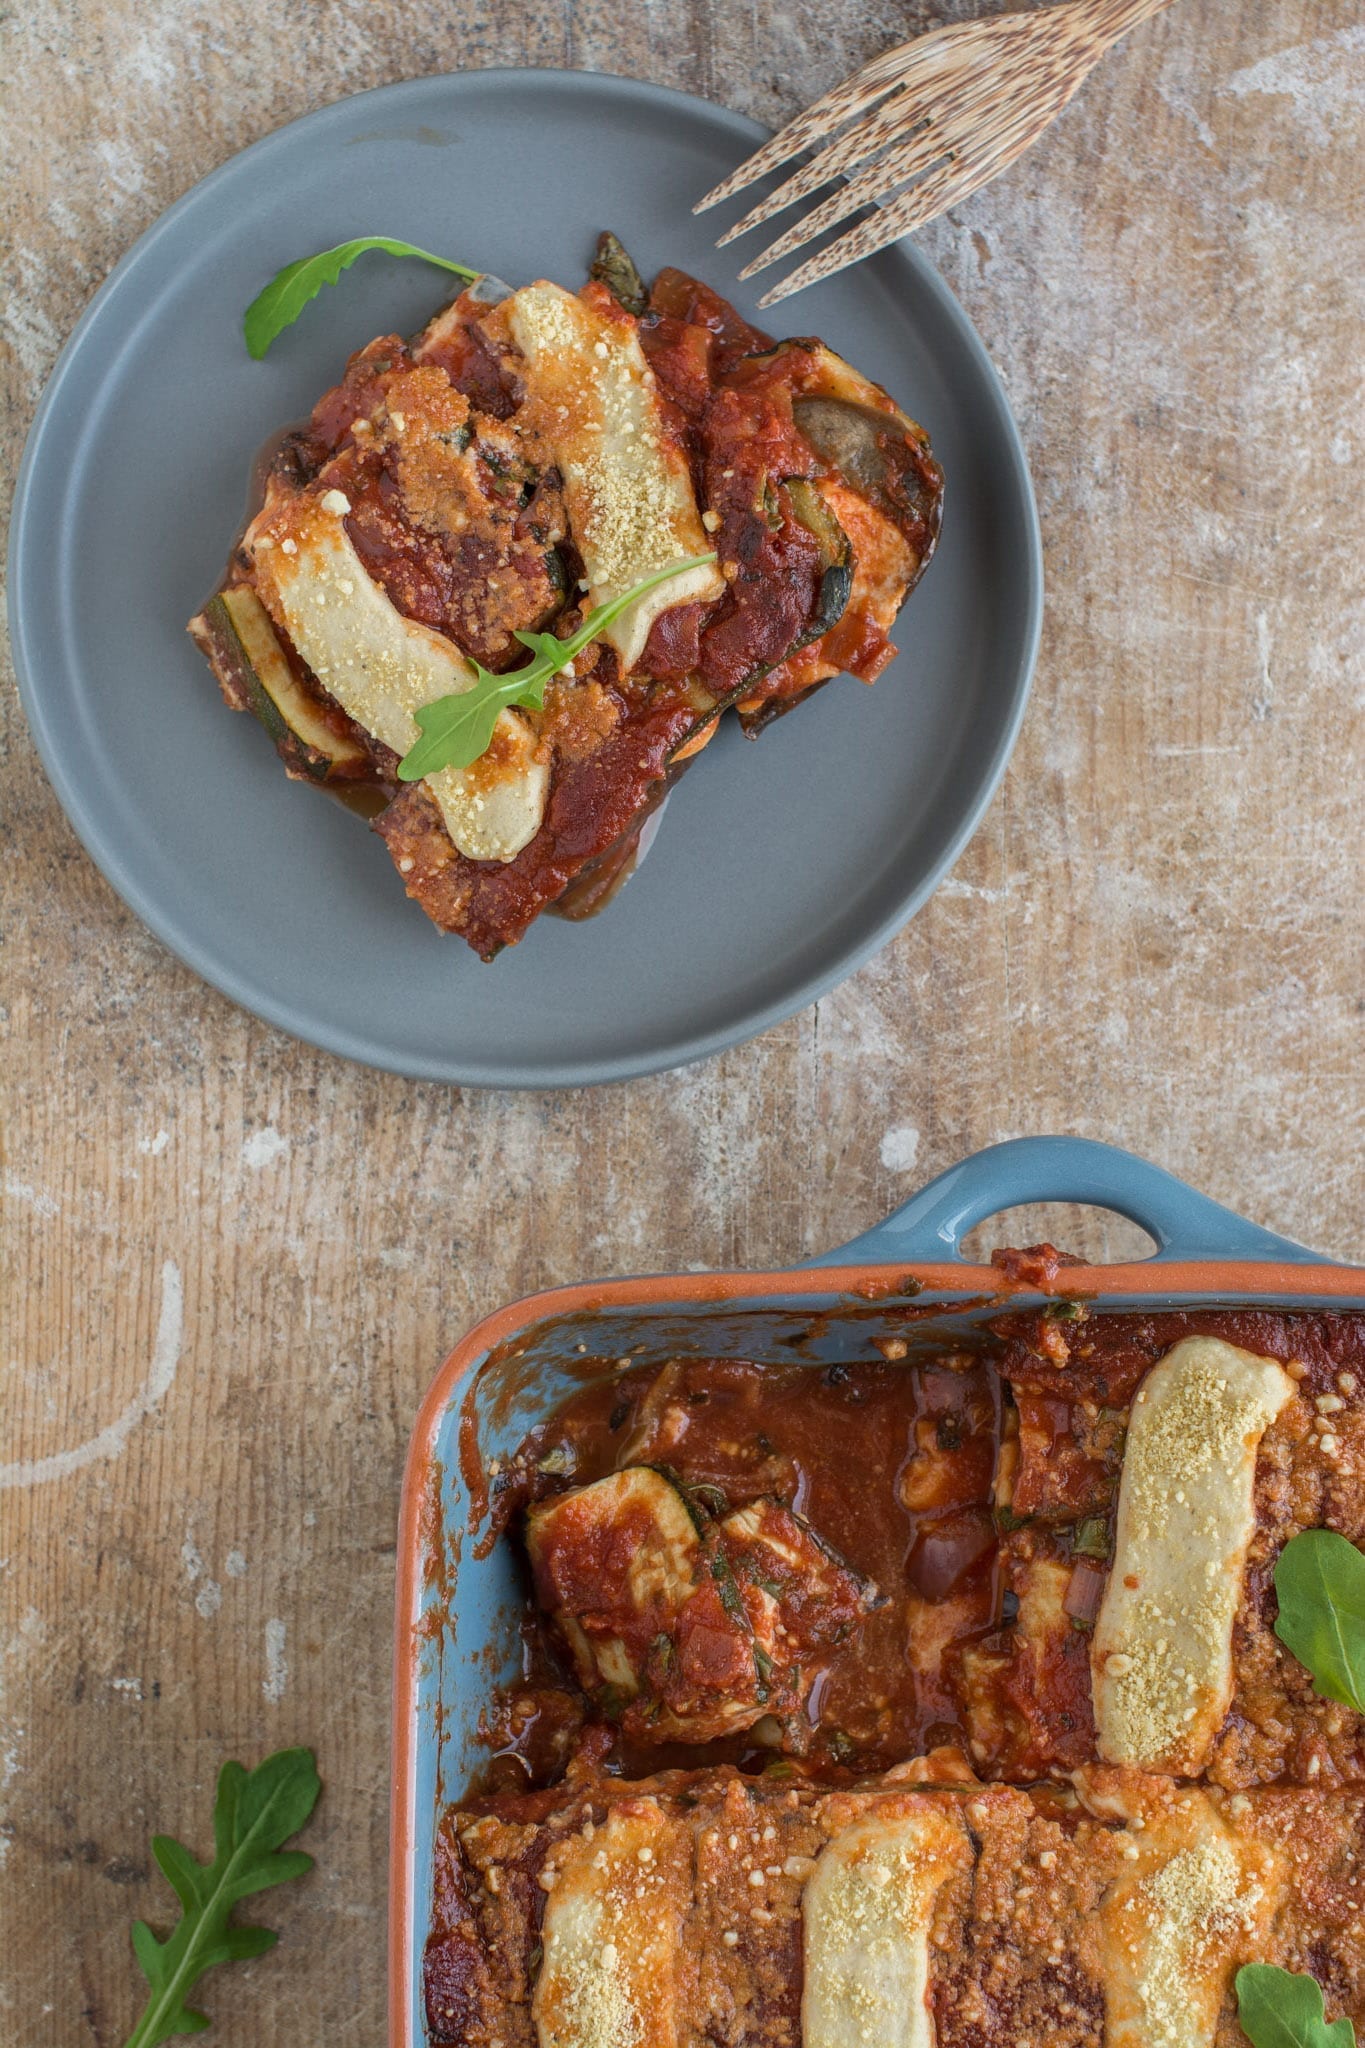 Superbly flavourful vegan tomato zucchini casserole with mozzarella that is oil-free and gluten-free. Excellent Mediterranean vegan recipe for side dish or main meal. 